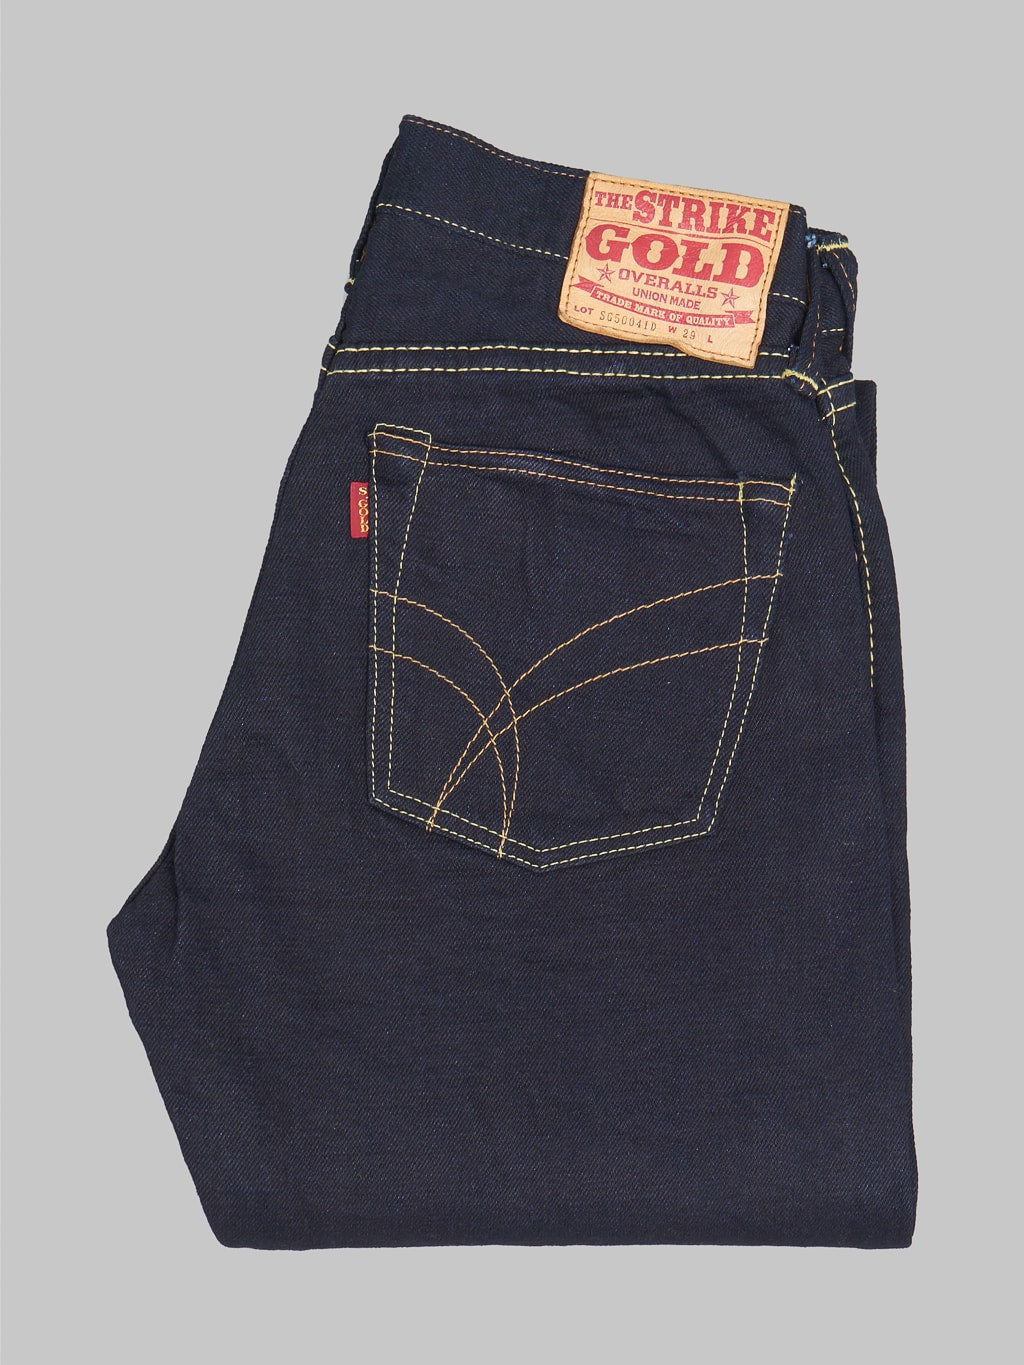 The Strike Gold 5004ID double indigo straight tapered selvedge jeans